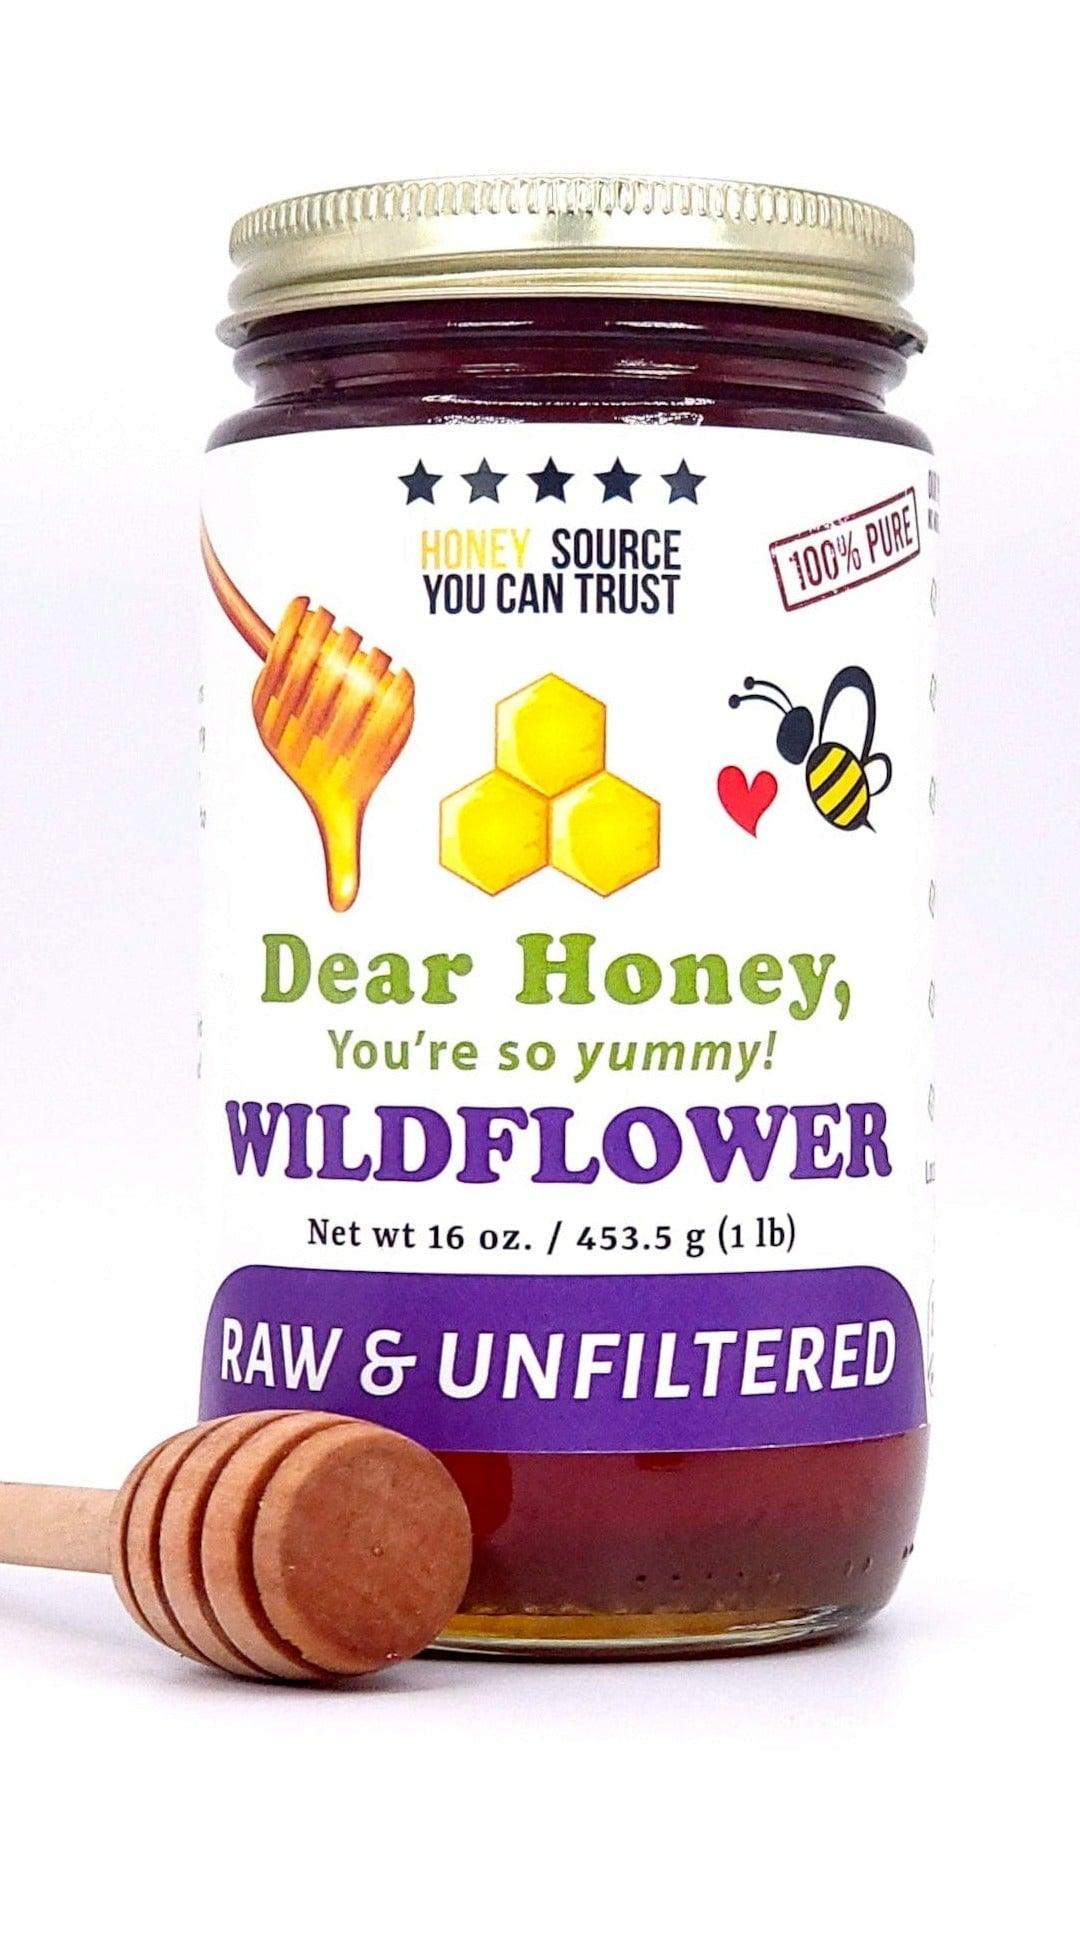 Wildflower Honey: All Natural Pure Raw and Unfiltered Local New York Honey - Dear Honey Store